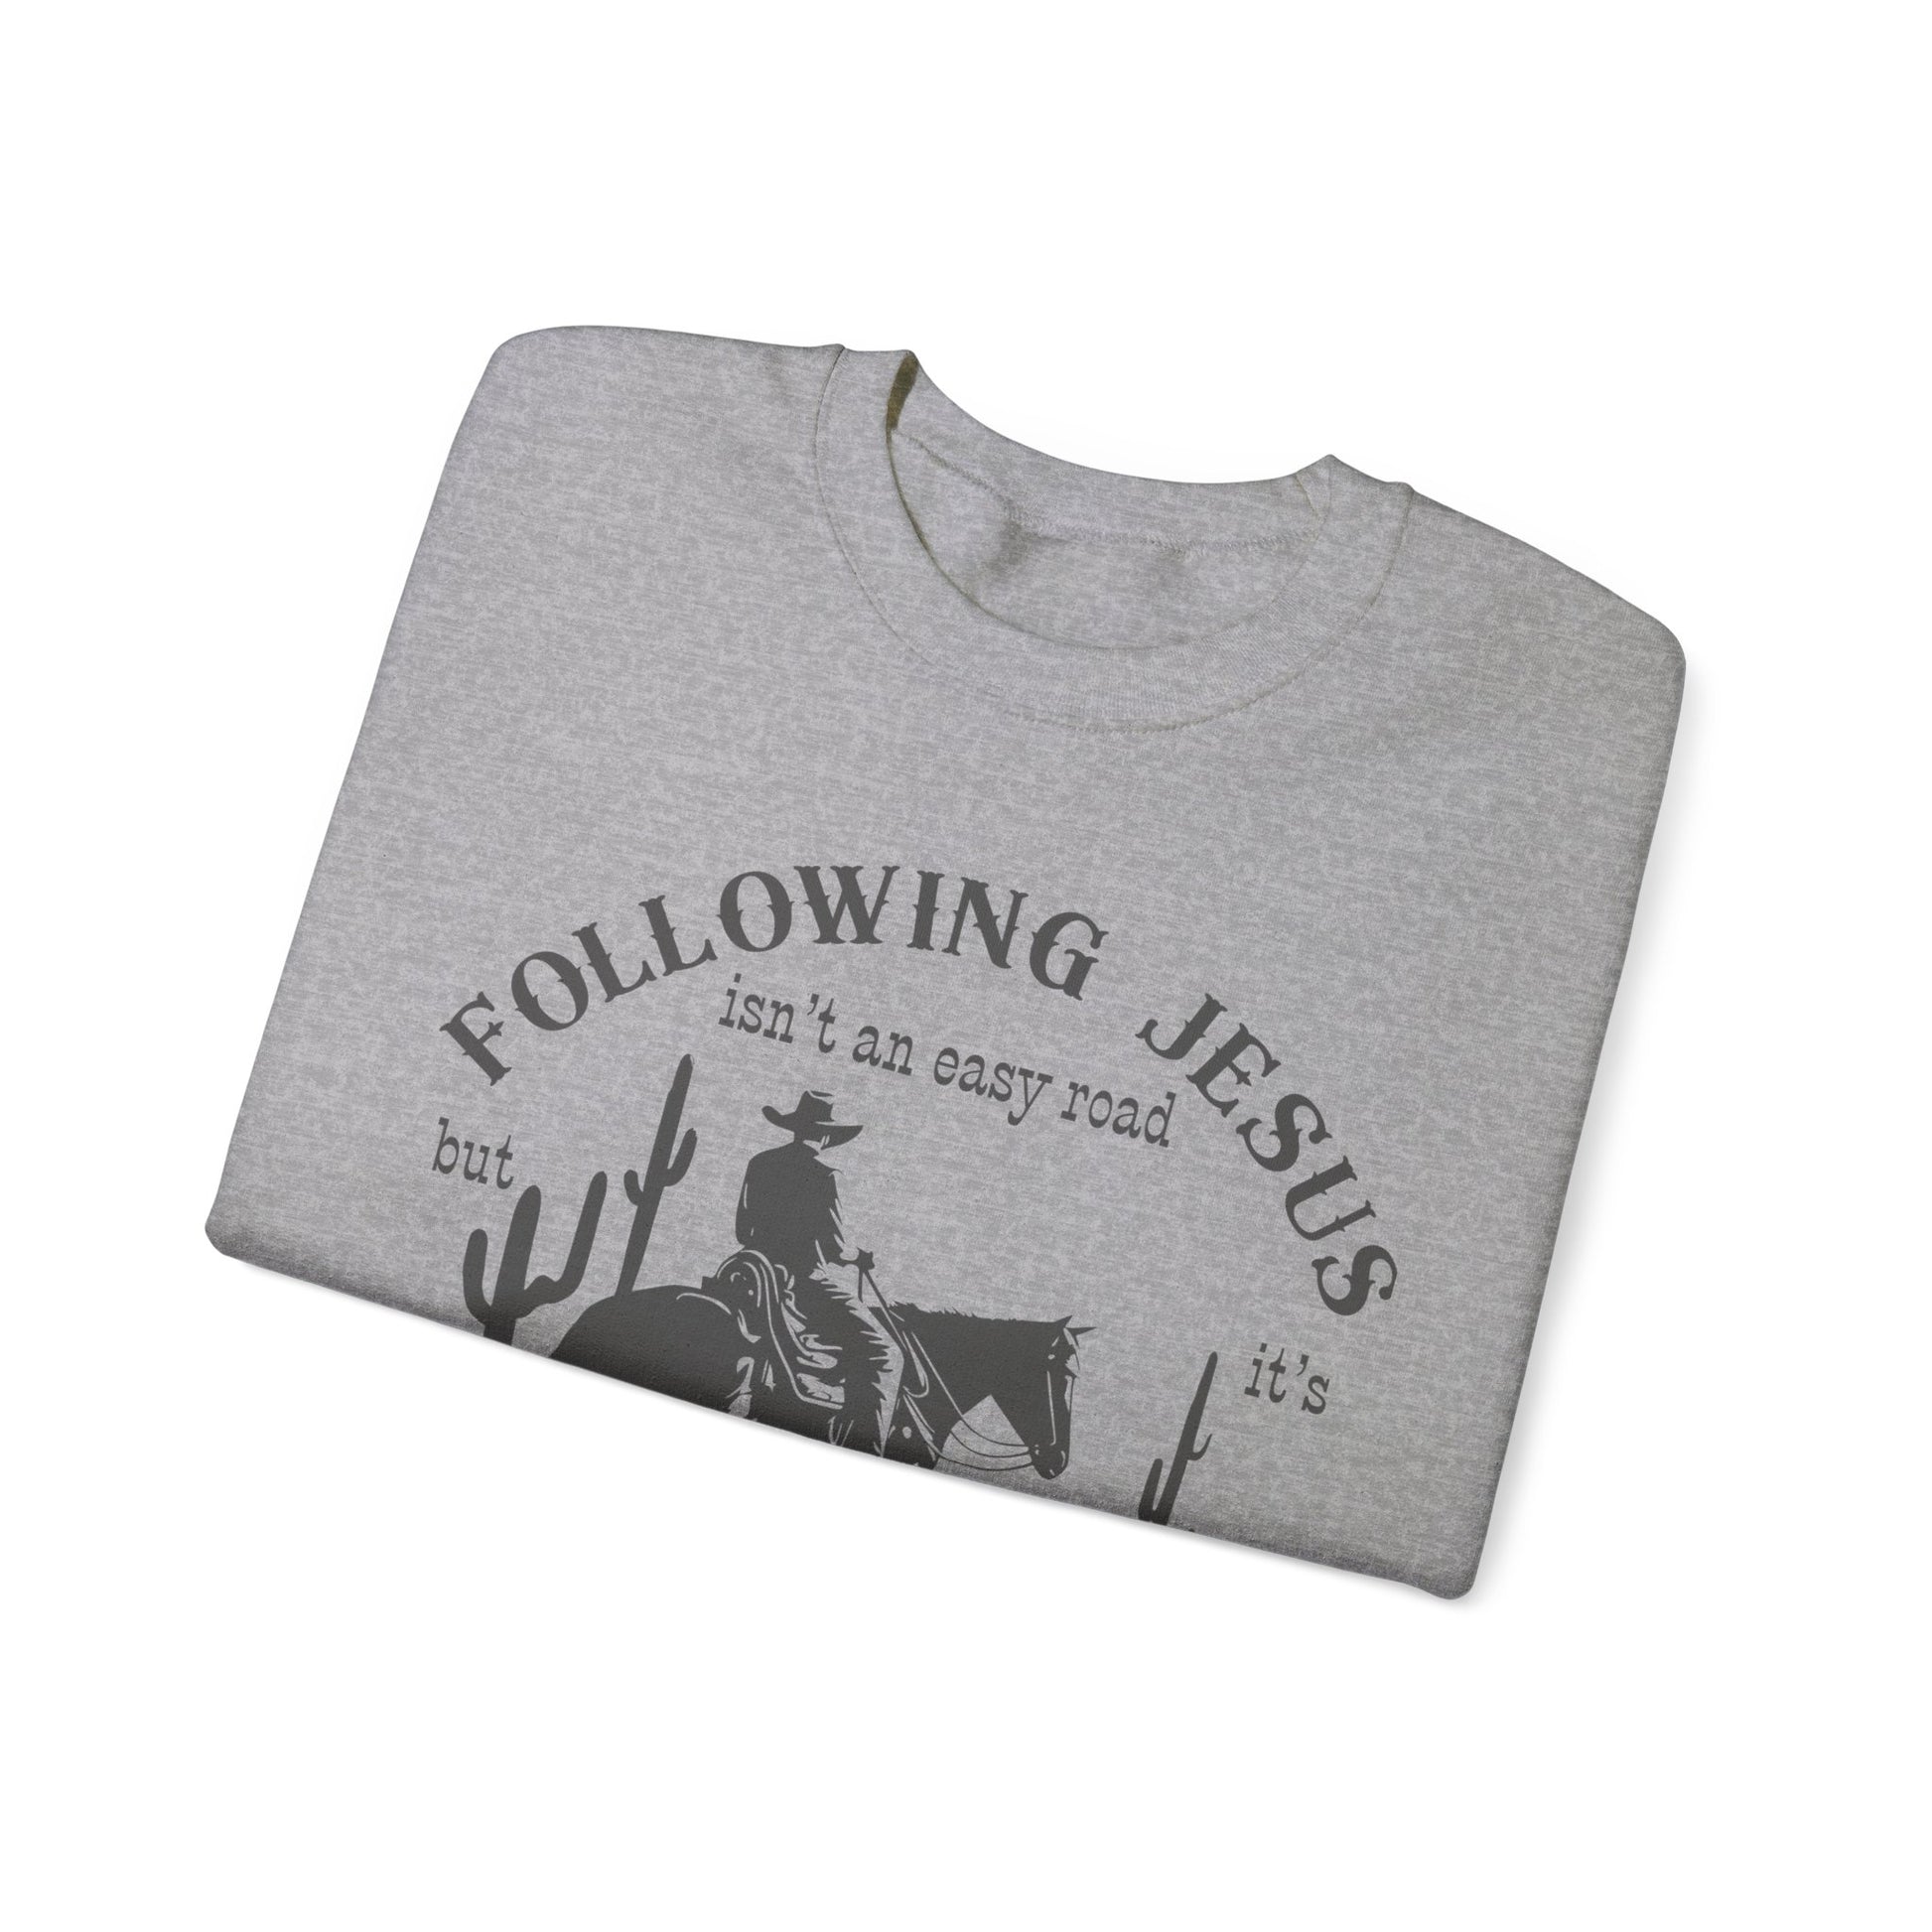 Following Jesus isn’t an Easy Road But Jesus Christian Sweatshirt Father’s Day gift Christian gift Jesus saves Jesus Christ Western Cowboy Faith God - Stay Tomorrow Needs You Following Jesus isn’t an Easy Road But Jesus Christian Sweatshirt Father’s Day gift Christian gift Jesus saves Jesus Christ Western Cowboy Faith God